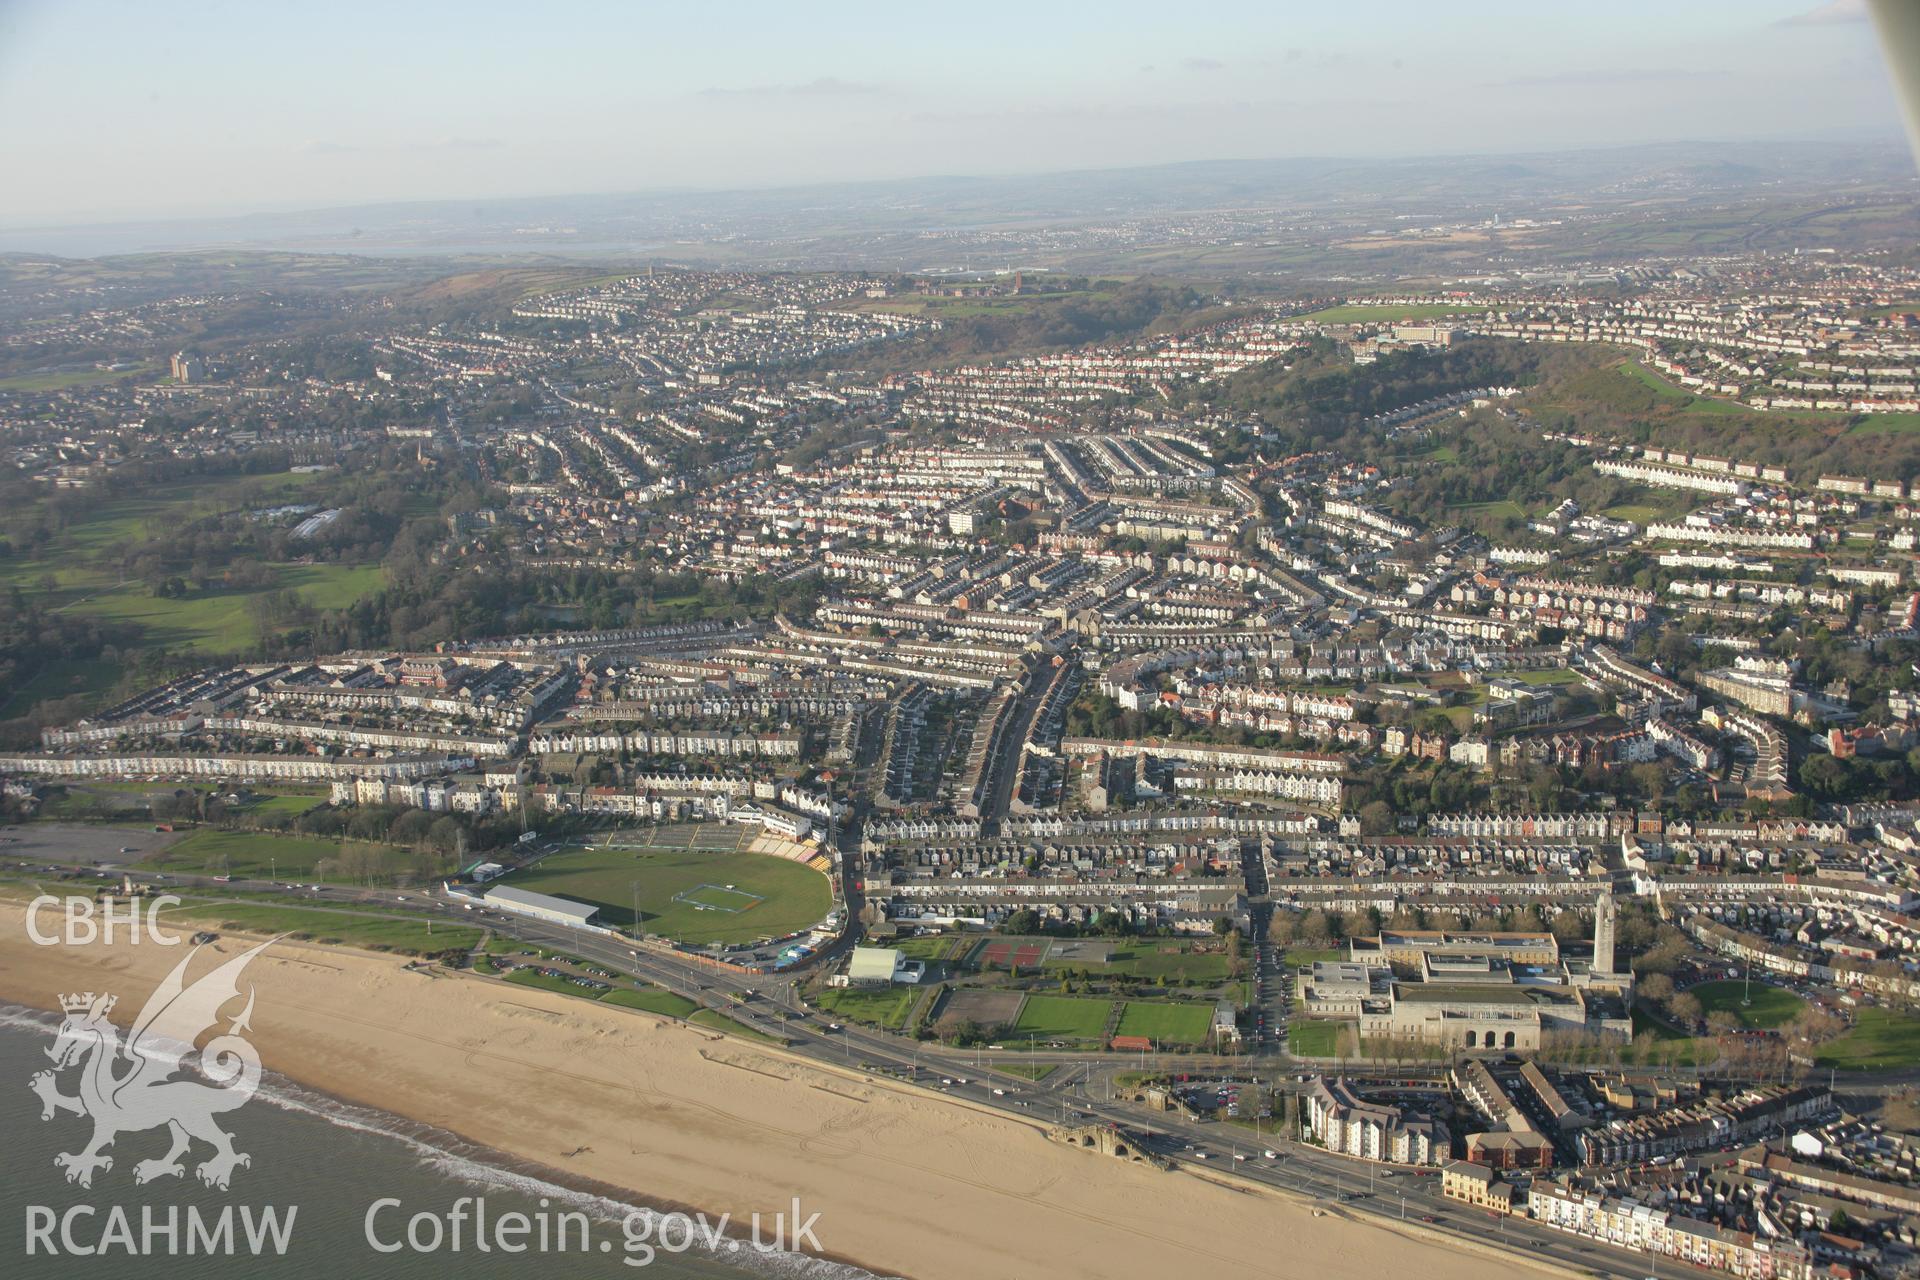 RCAHMW colour oblique aerial photograph of Guildhall, Swansea from the south-east. A wide view with the Uplands area beyond. Taken on 26 January 2006 by Toby Driver.